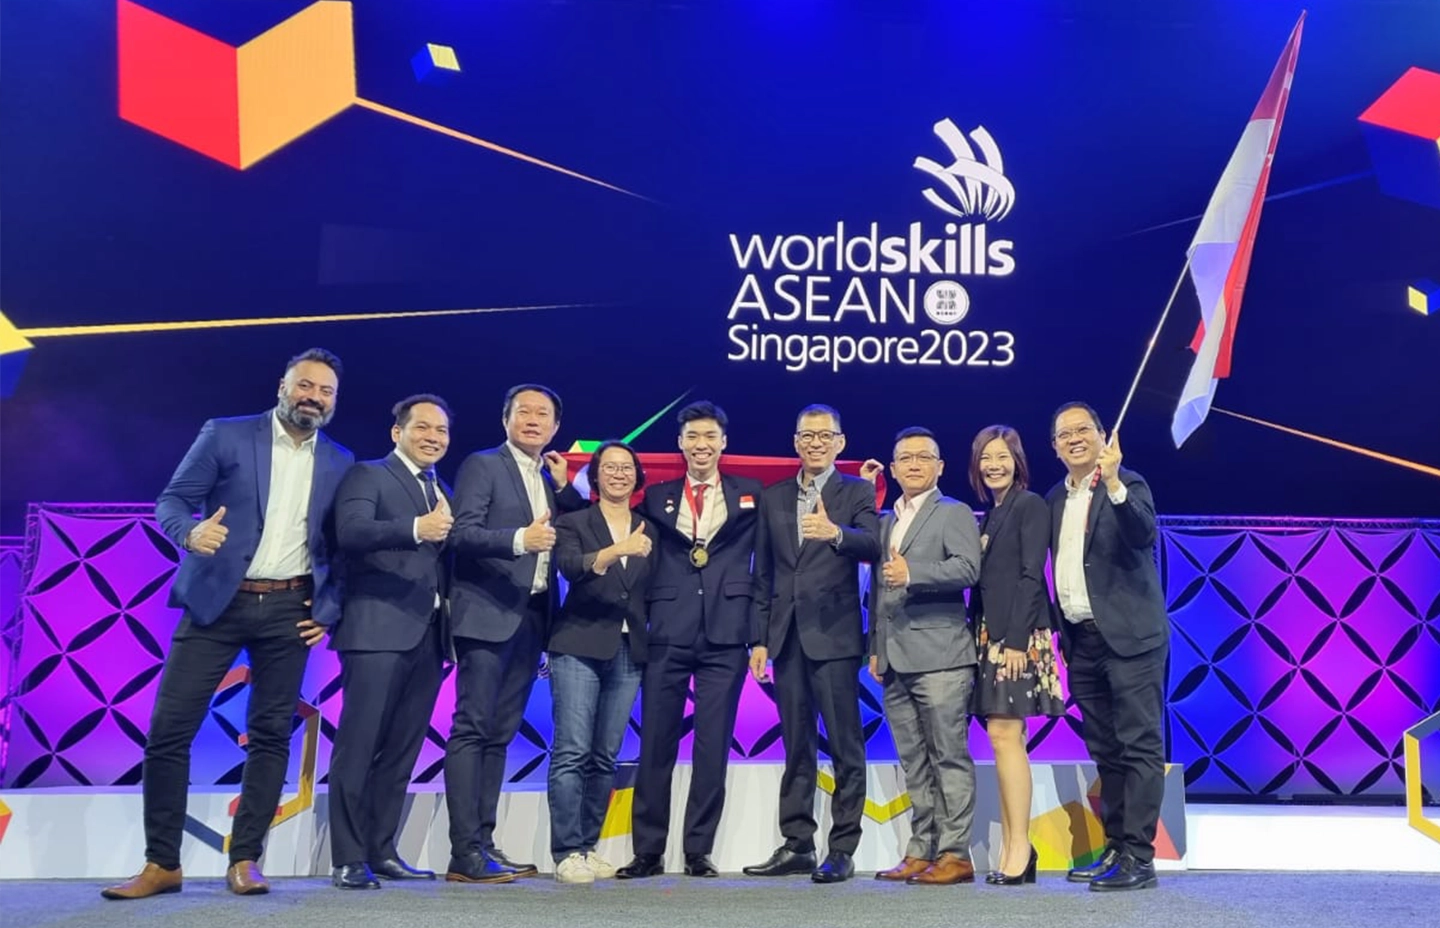 Leonard with his coaches on the WorldSkills ASEAN 2023 stage